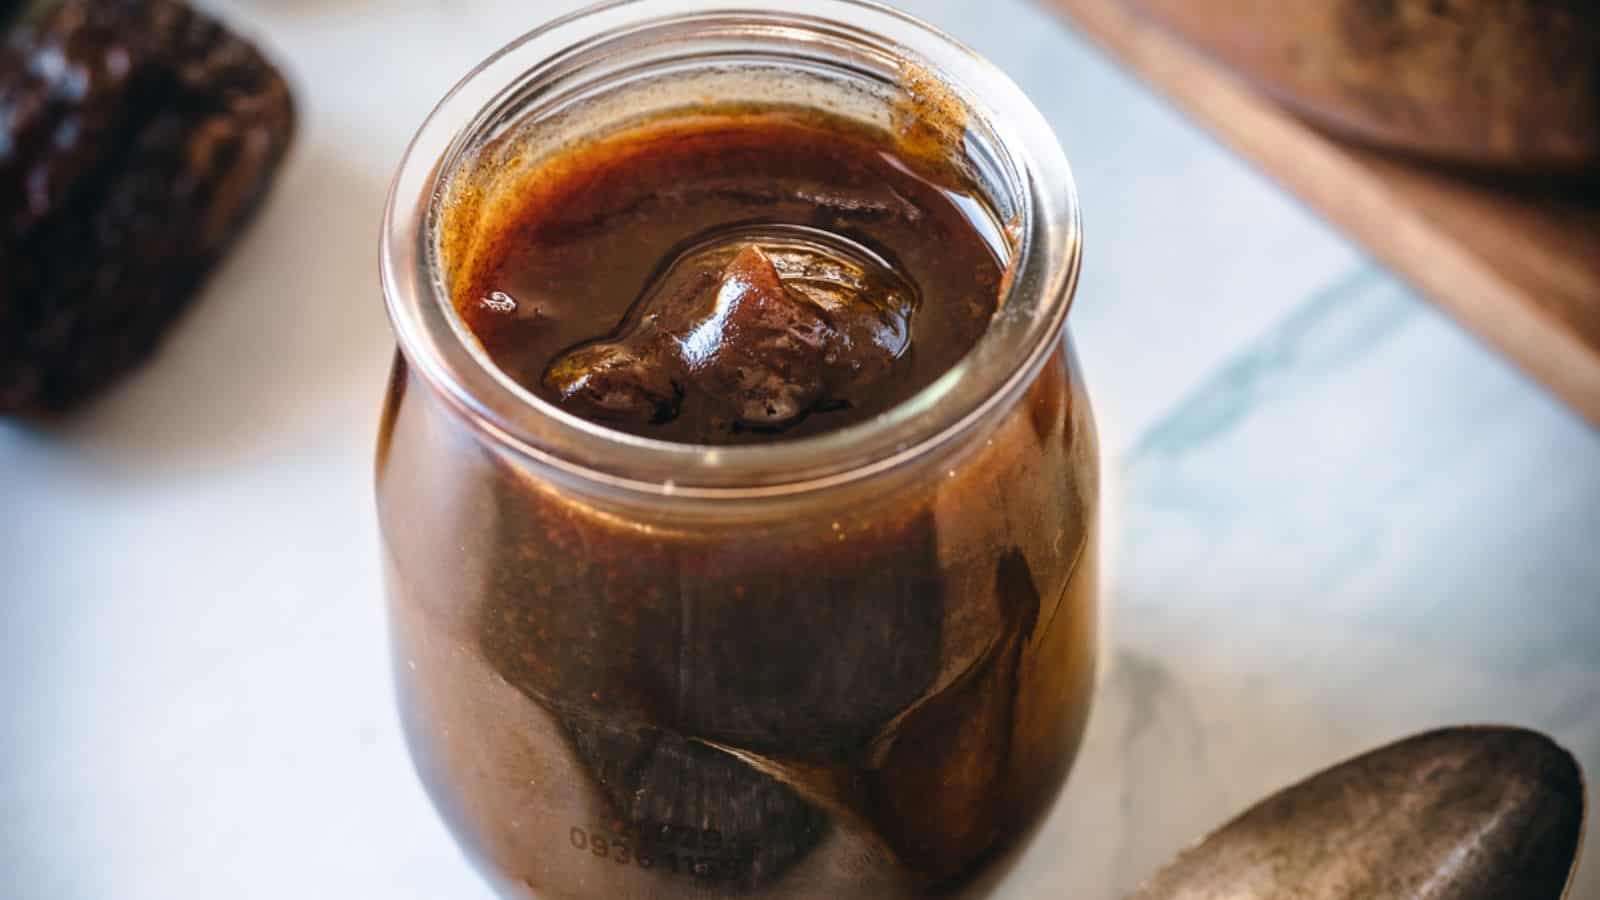 Jar of date syrup.